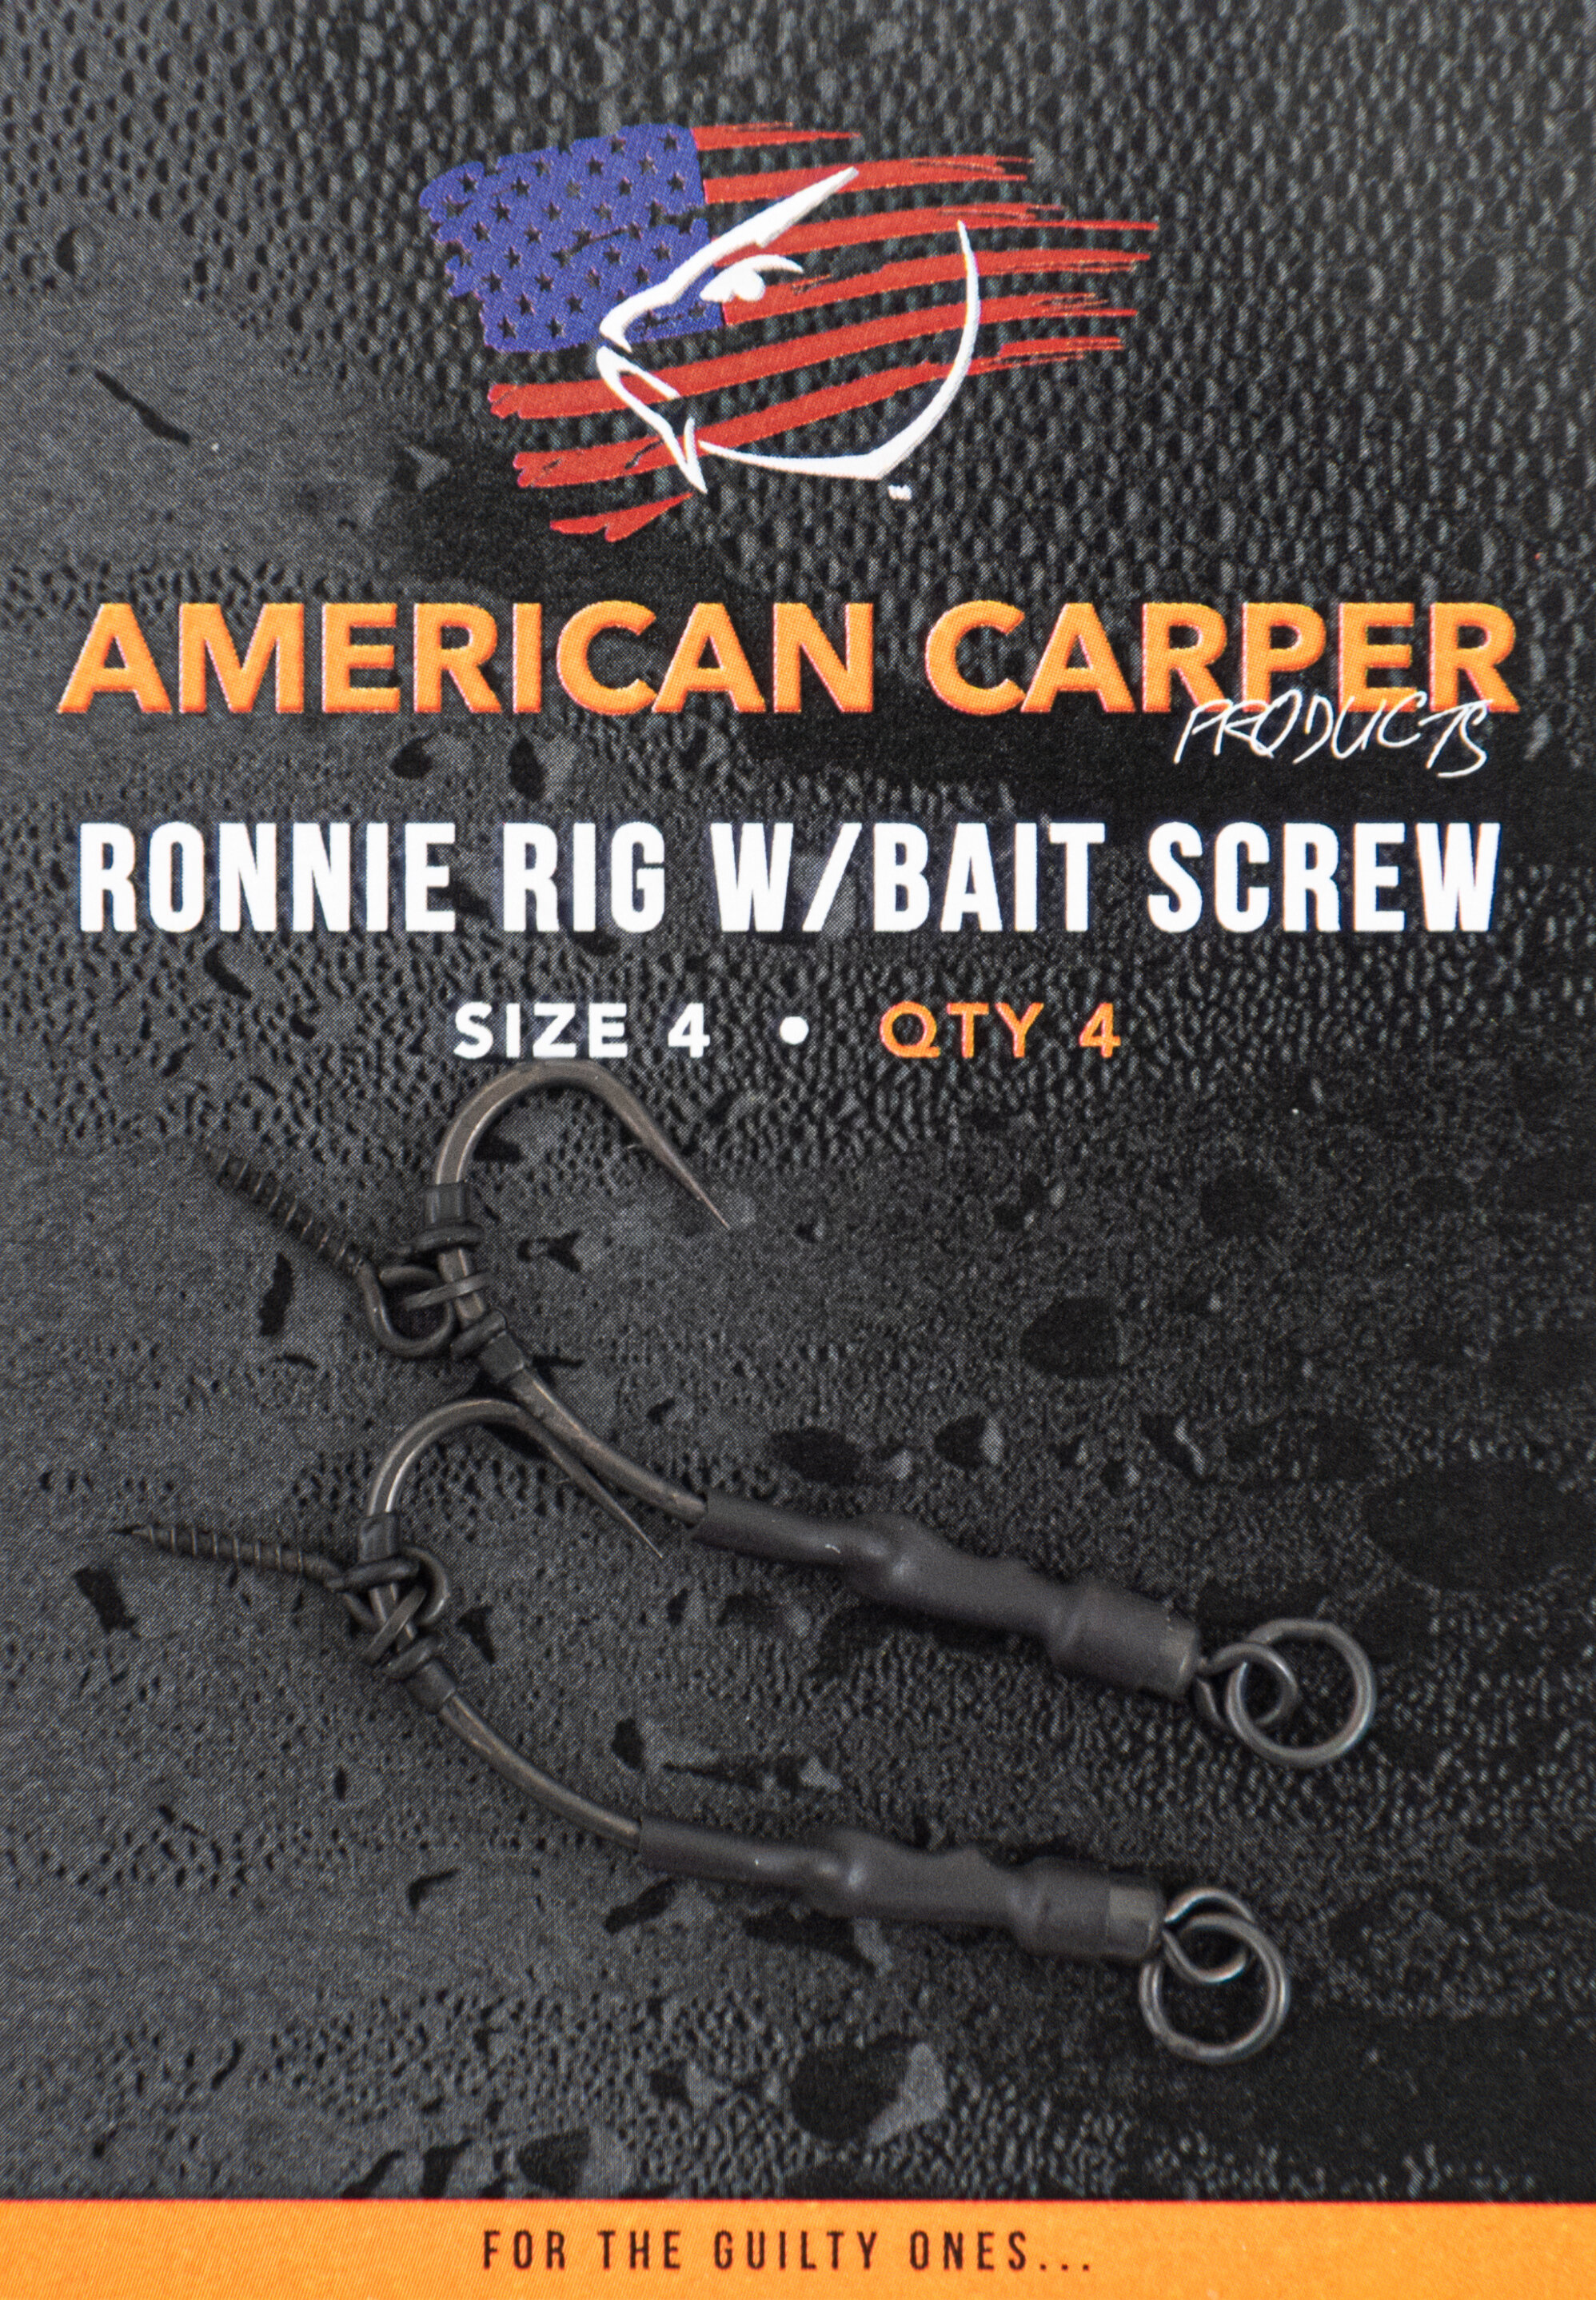 RONNIE RIG WITH BAIT SCREW CROPPED.jpg